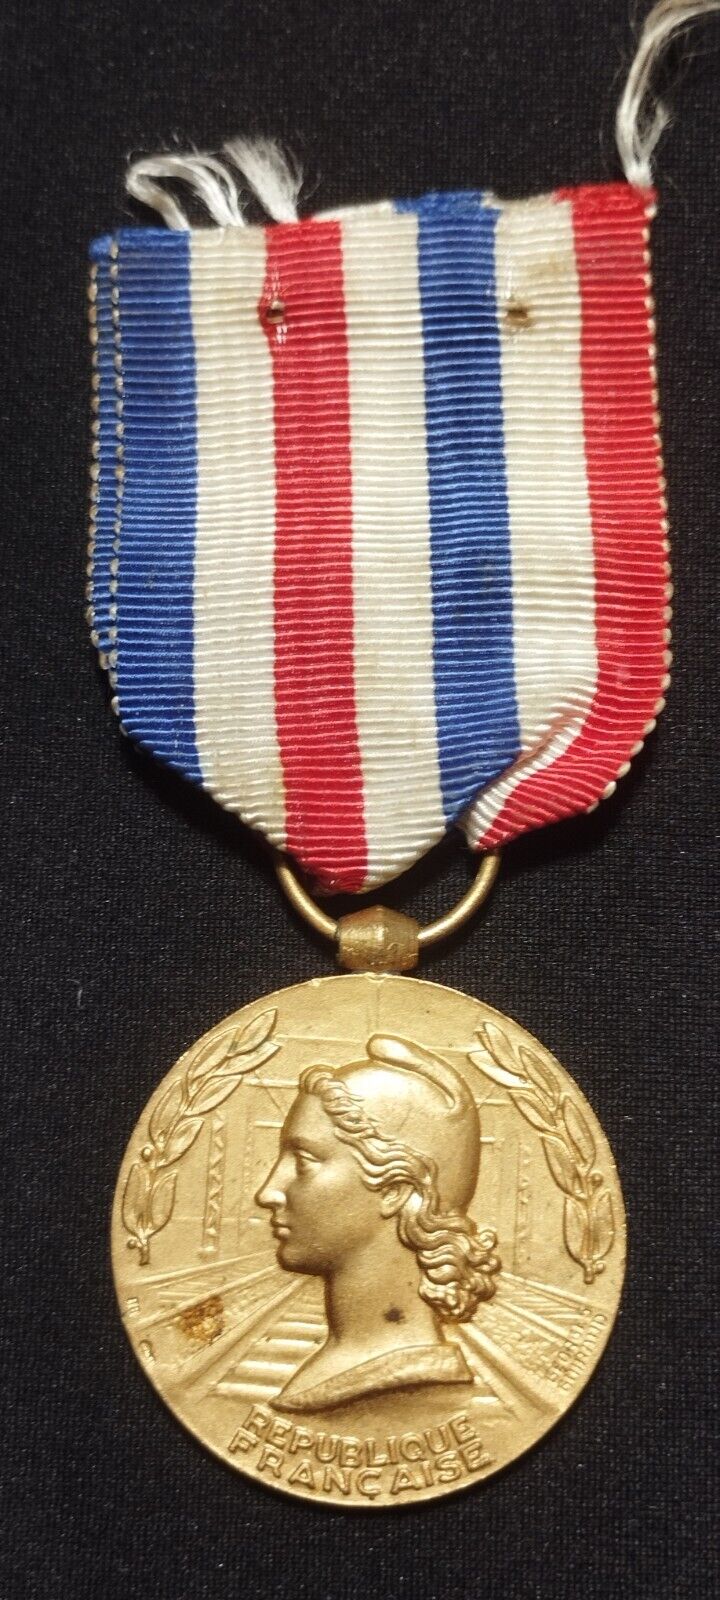 J4A* (REF951) 1960 French Civil Railway Medal French Medal